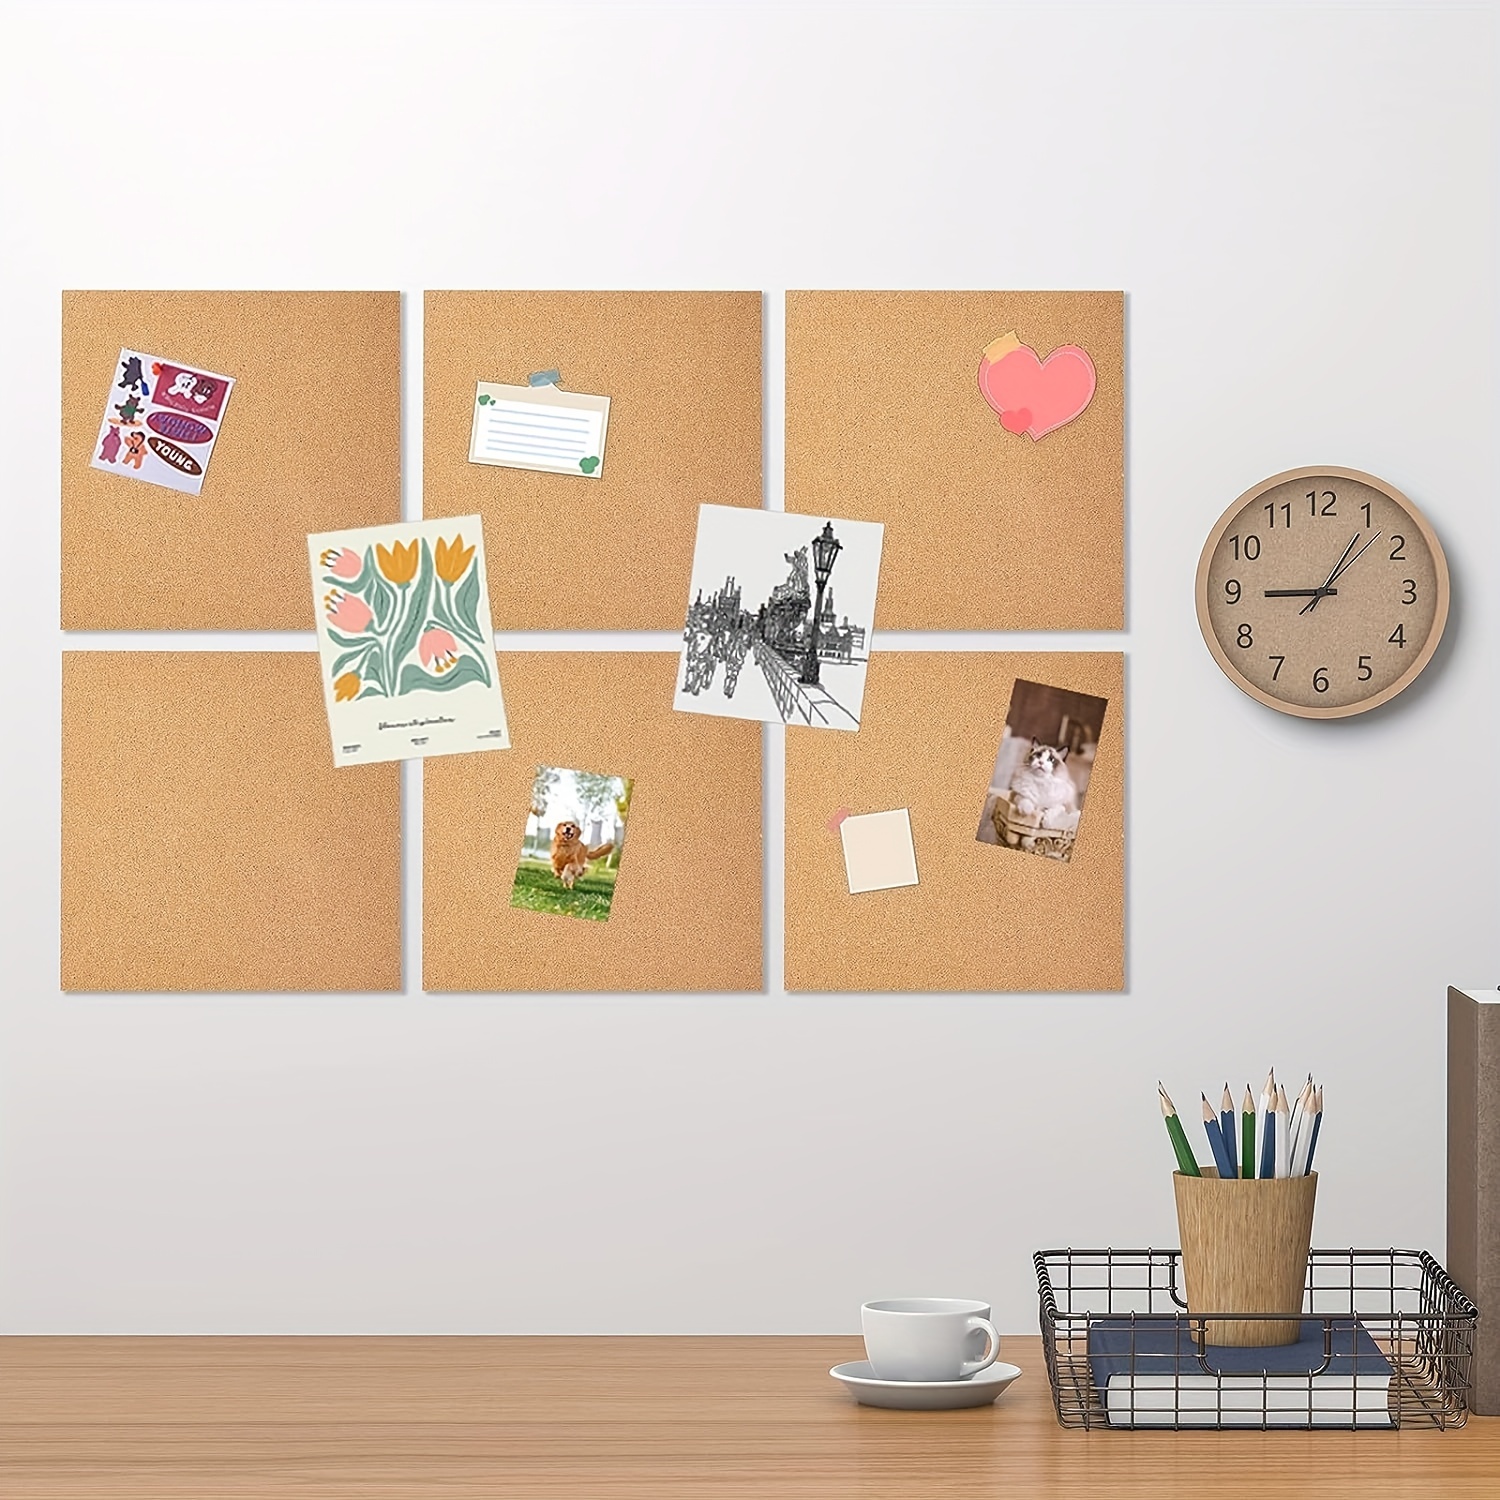 50 Pieces Cork Board Tiles Wall Bulletin Boards with Full Sticky Backing  Cork Sheets Cork Tiles for Painting Pictures Notes Drawing Photos Suqare 